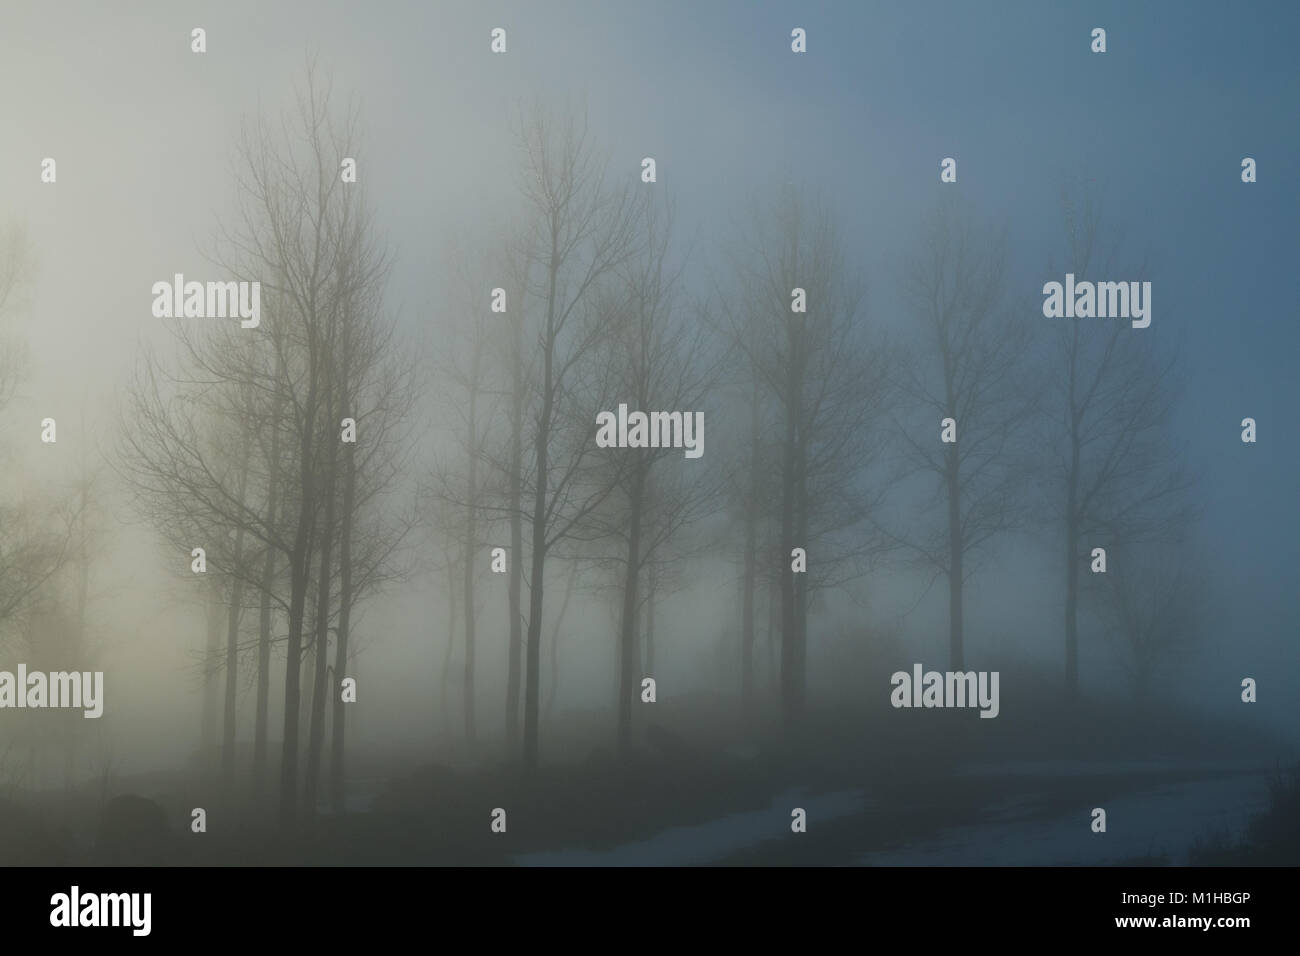 A picture of some trees on a small hill standing in the morning mist. Look mysterious and enigmatic. Stock Photo